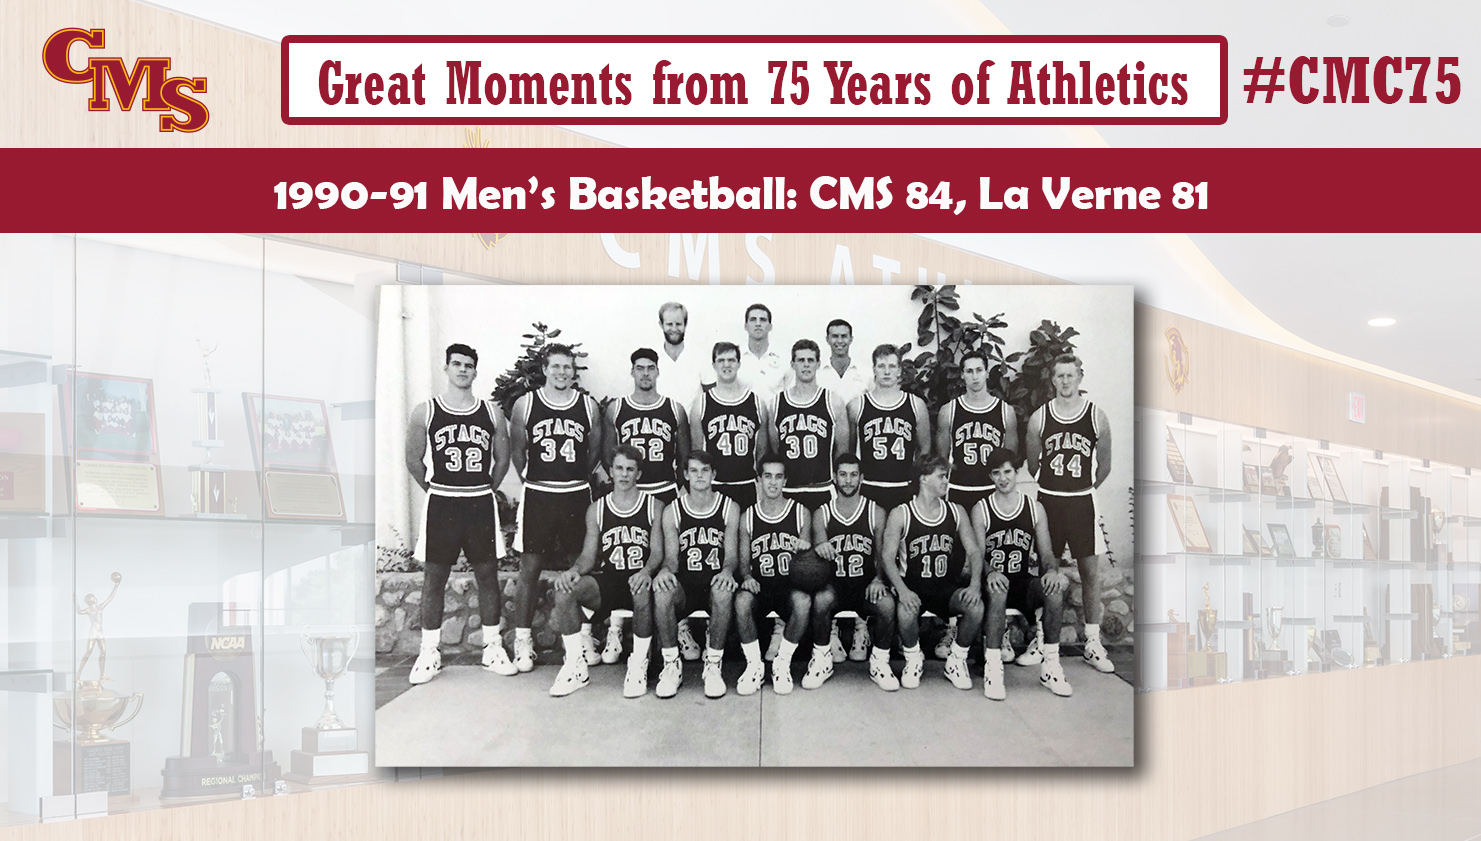 The 1990-91 CMS men's basketball team. The banner reads: Great Moments from 75 Years of Athletics, 1990-91 Men's Basketball: CMS 84, La Verne 81 with the hashtag #CMC75